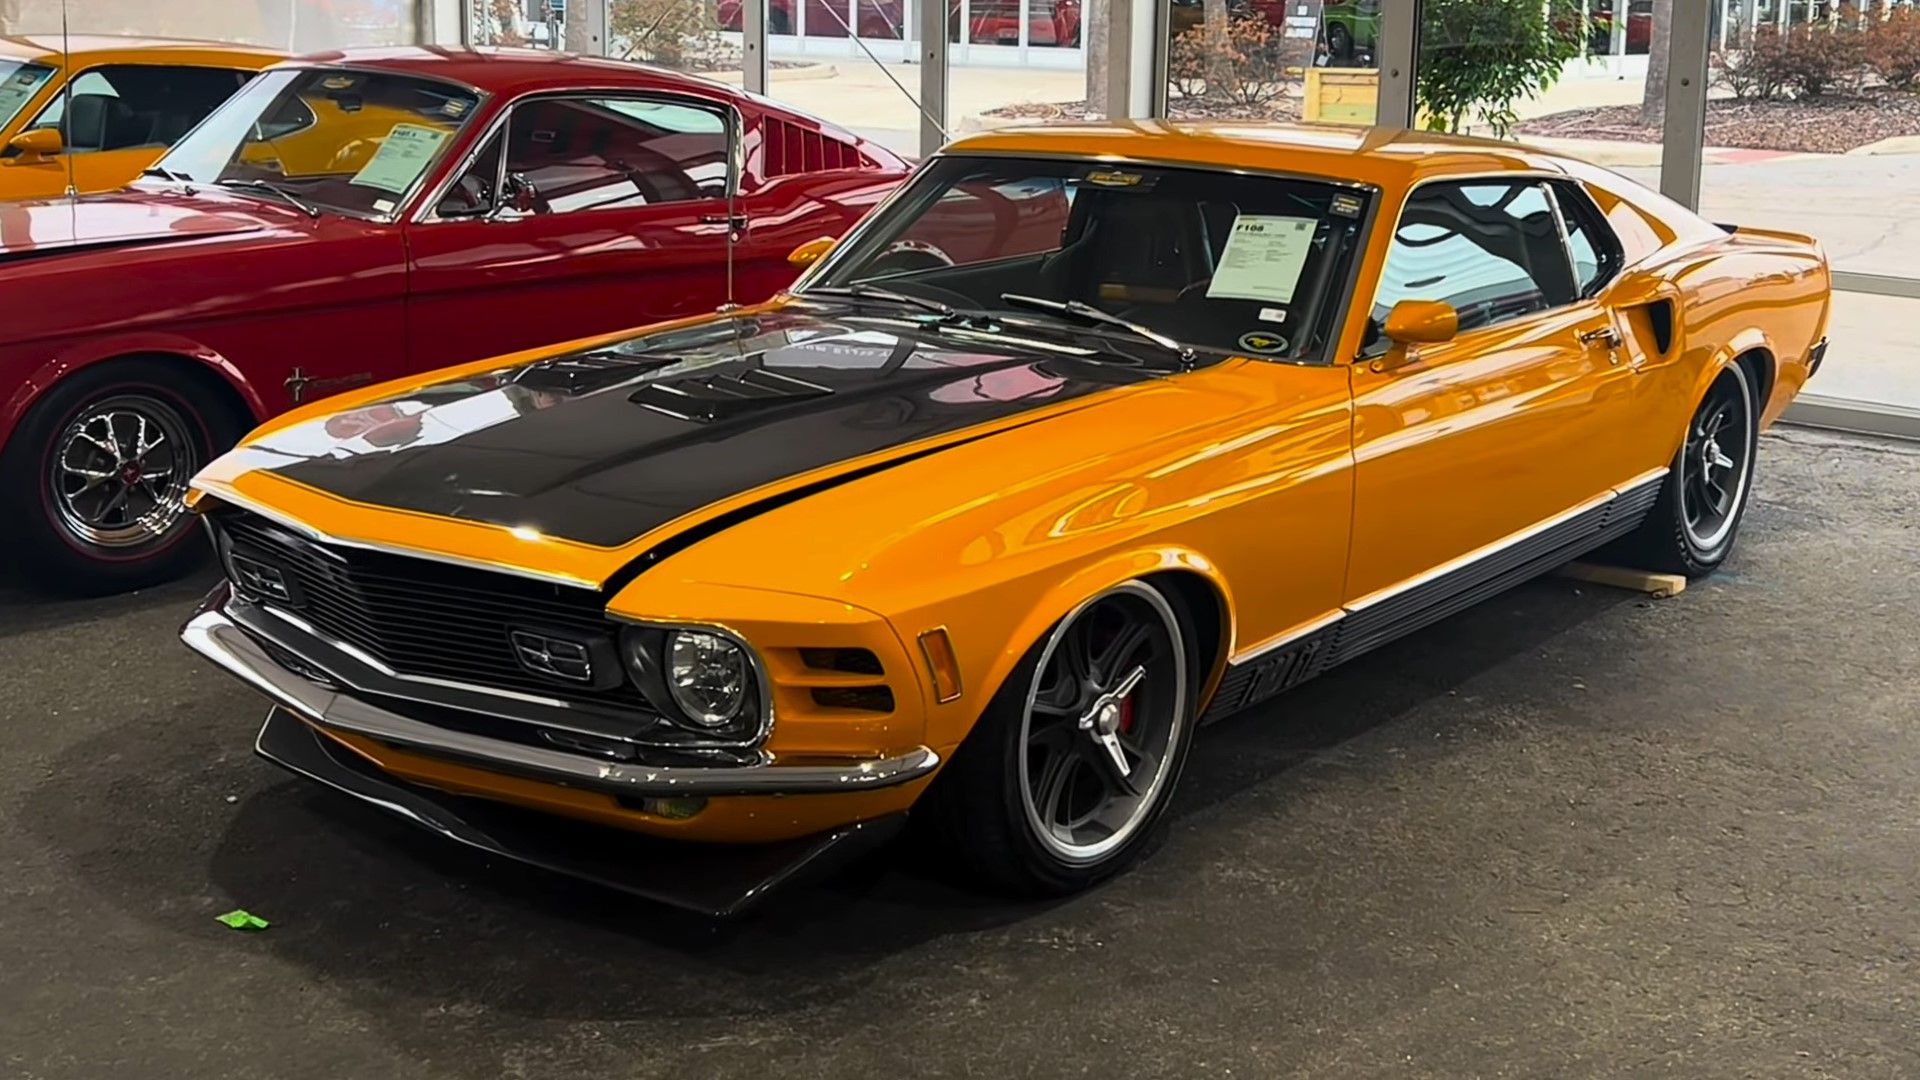 A yellow 1970 Ford Mustang Mach 1 mid-engine restomod front quarter shot